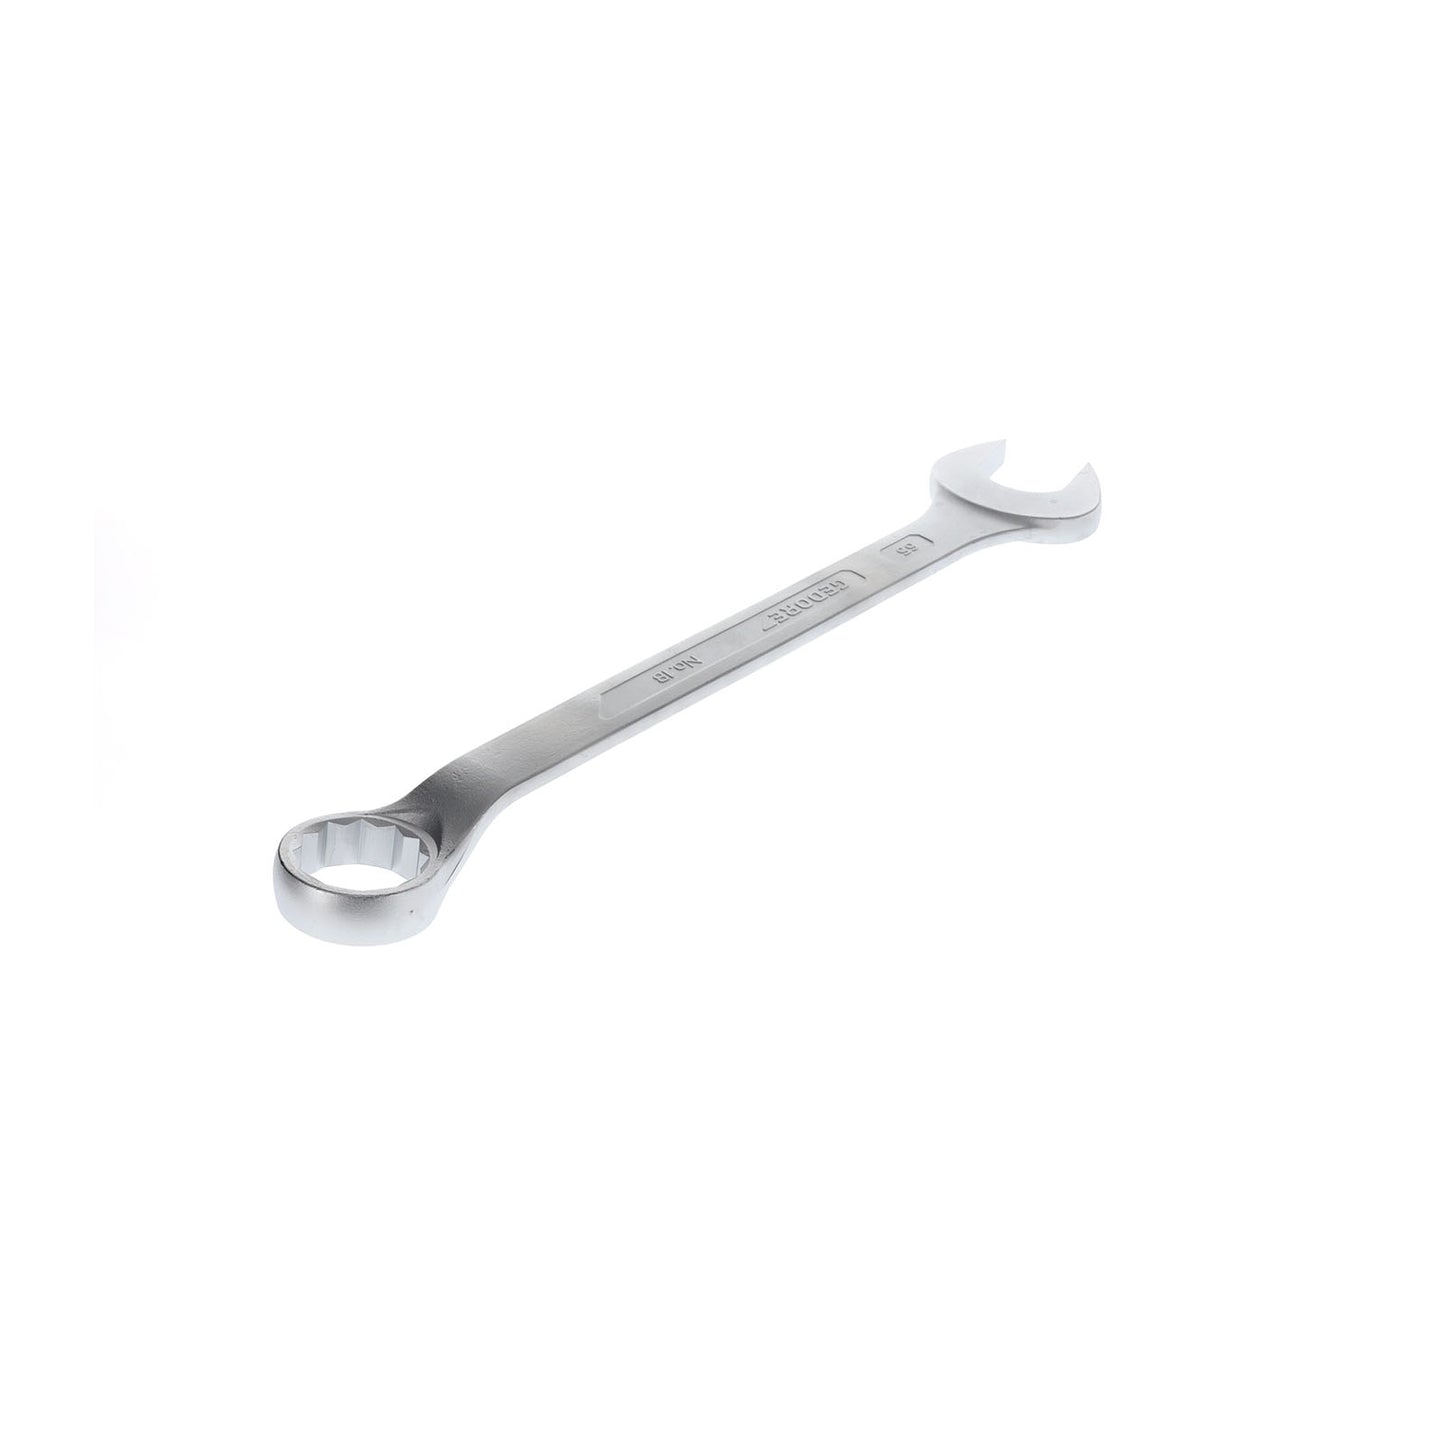 GEDORE 1 B 65 - Offset Combination Wrench, 65mm (6004660)